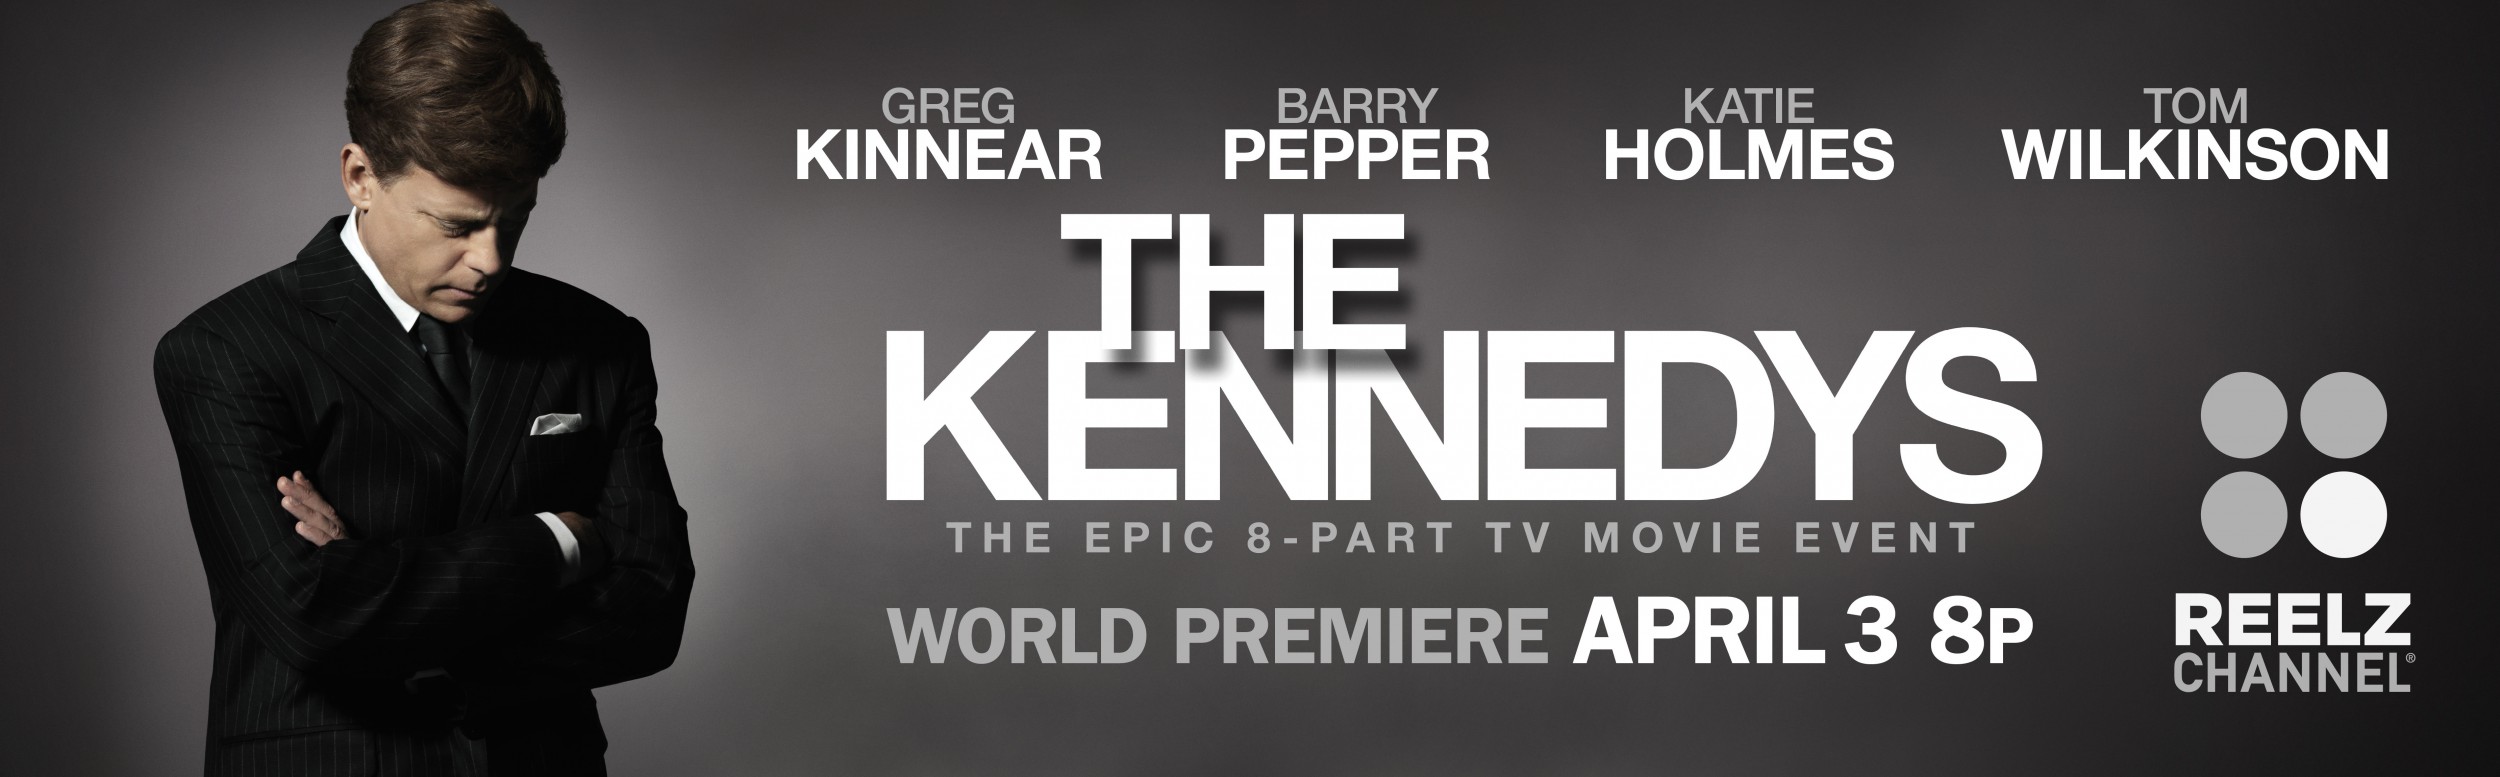 Mega Sized TV Poster Image for The Kennedys (#2 of 6)